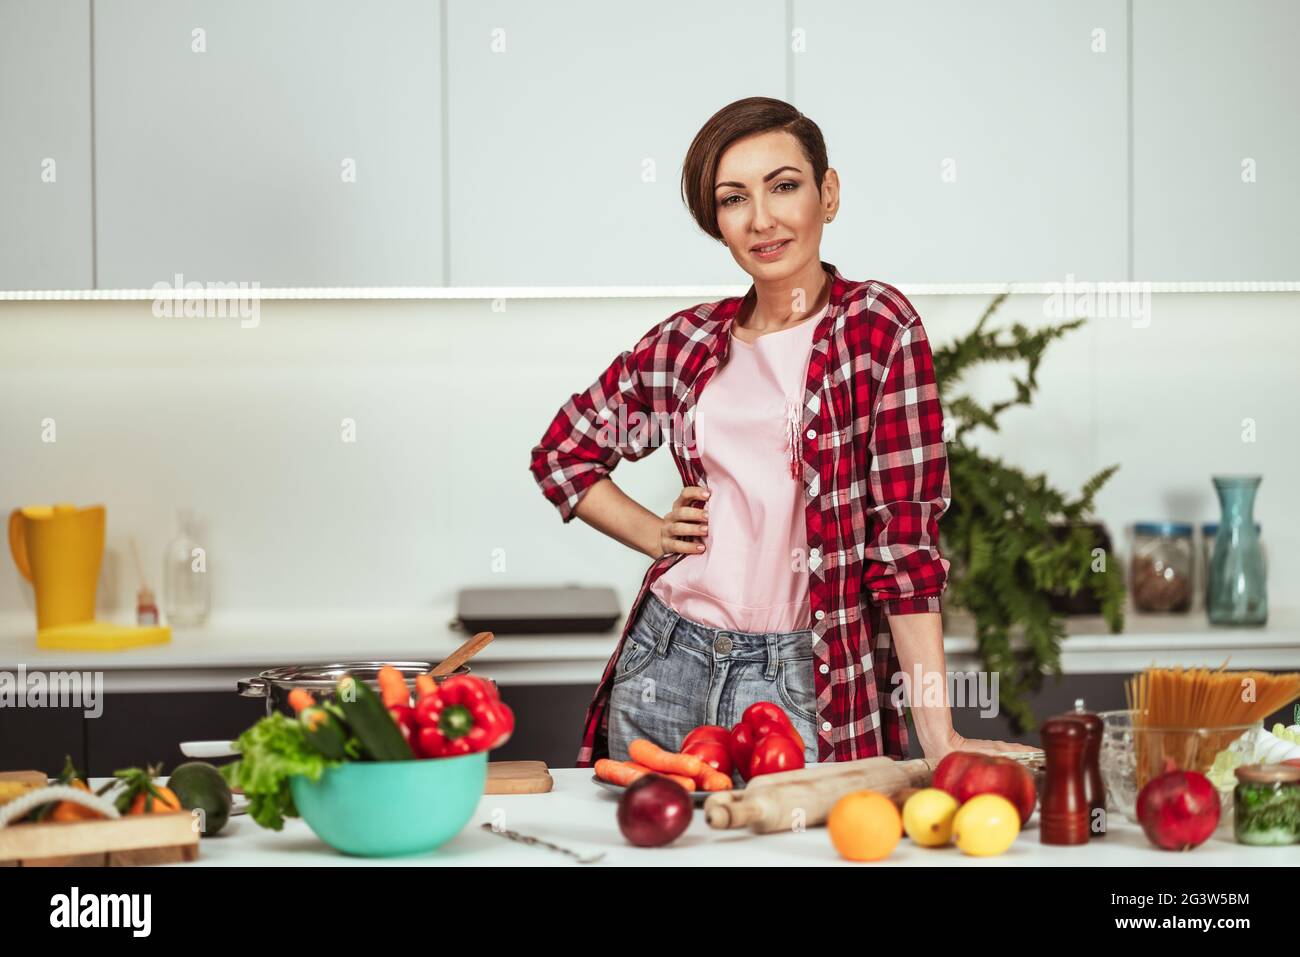 Pretty housewife cutting ingredients on table cooking a lunch standing in the kitchen with one hand on a side. Healthy lifestyle Stock Photo